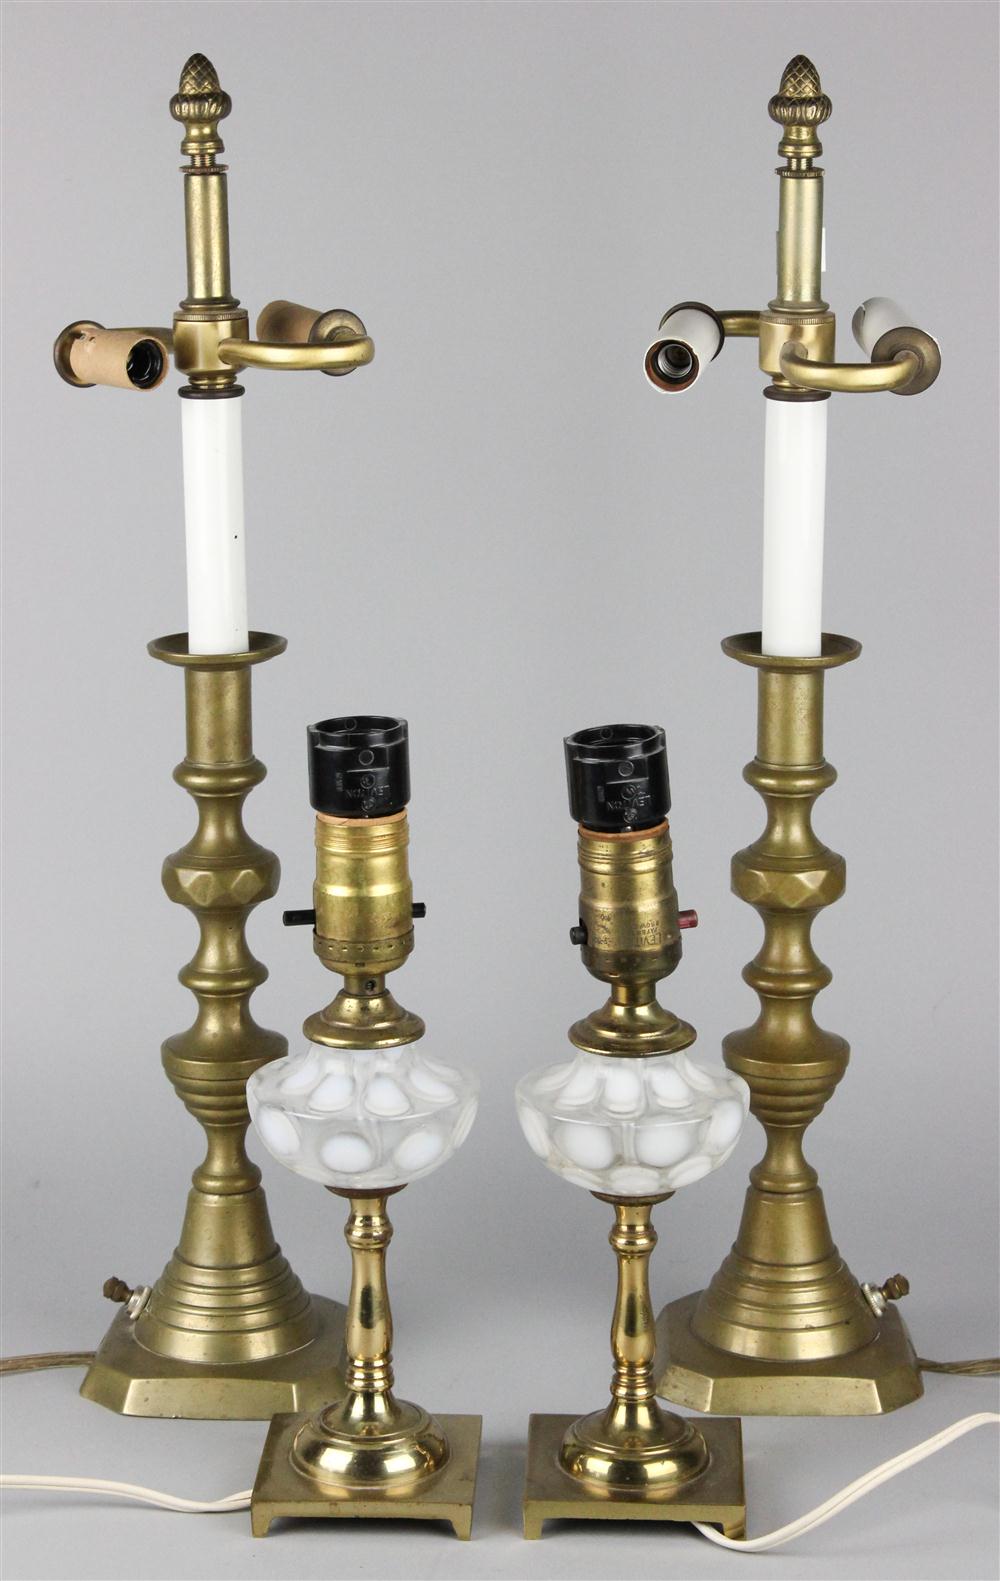 TWO PAIRS OF TABLE LAMPS one a 146d7f